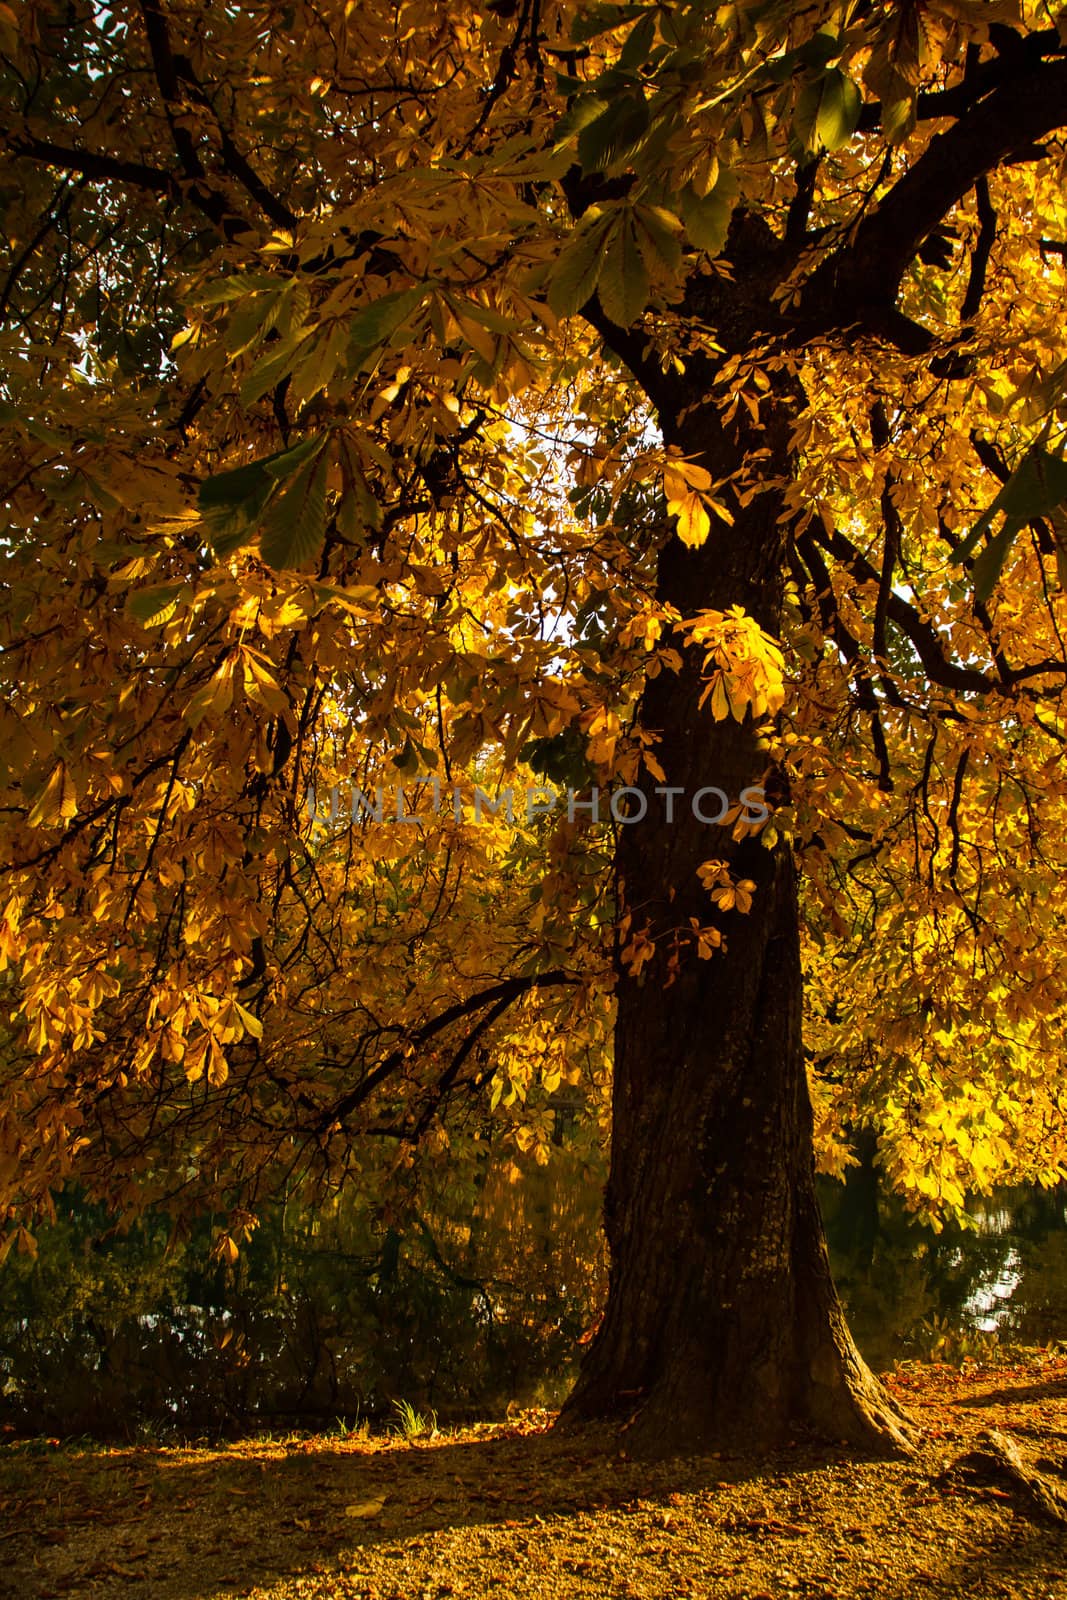 One beautiful tree in the autumn landscape